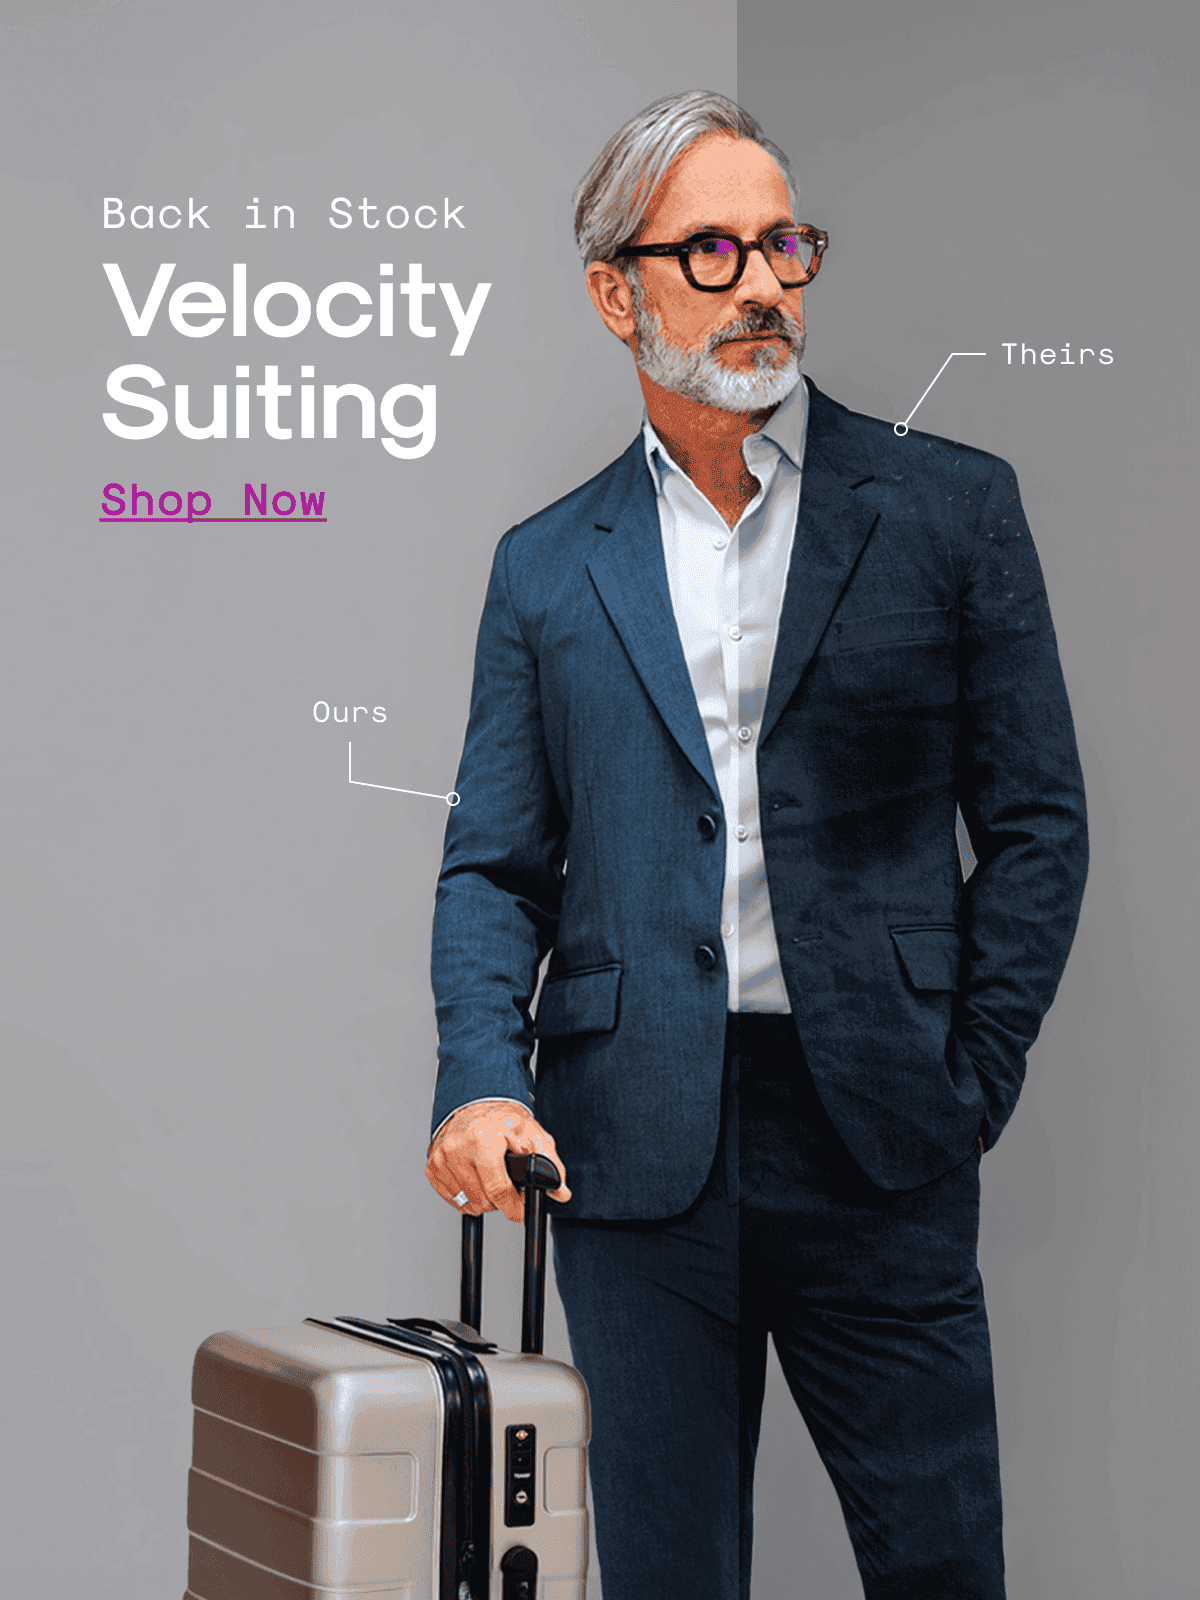 Back in Stock: Velocity Suiting